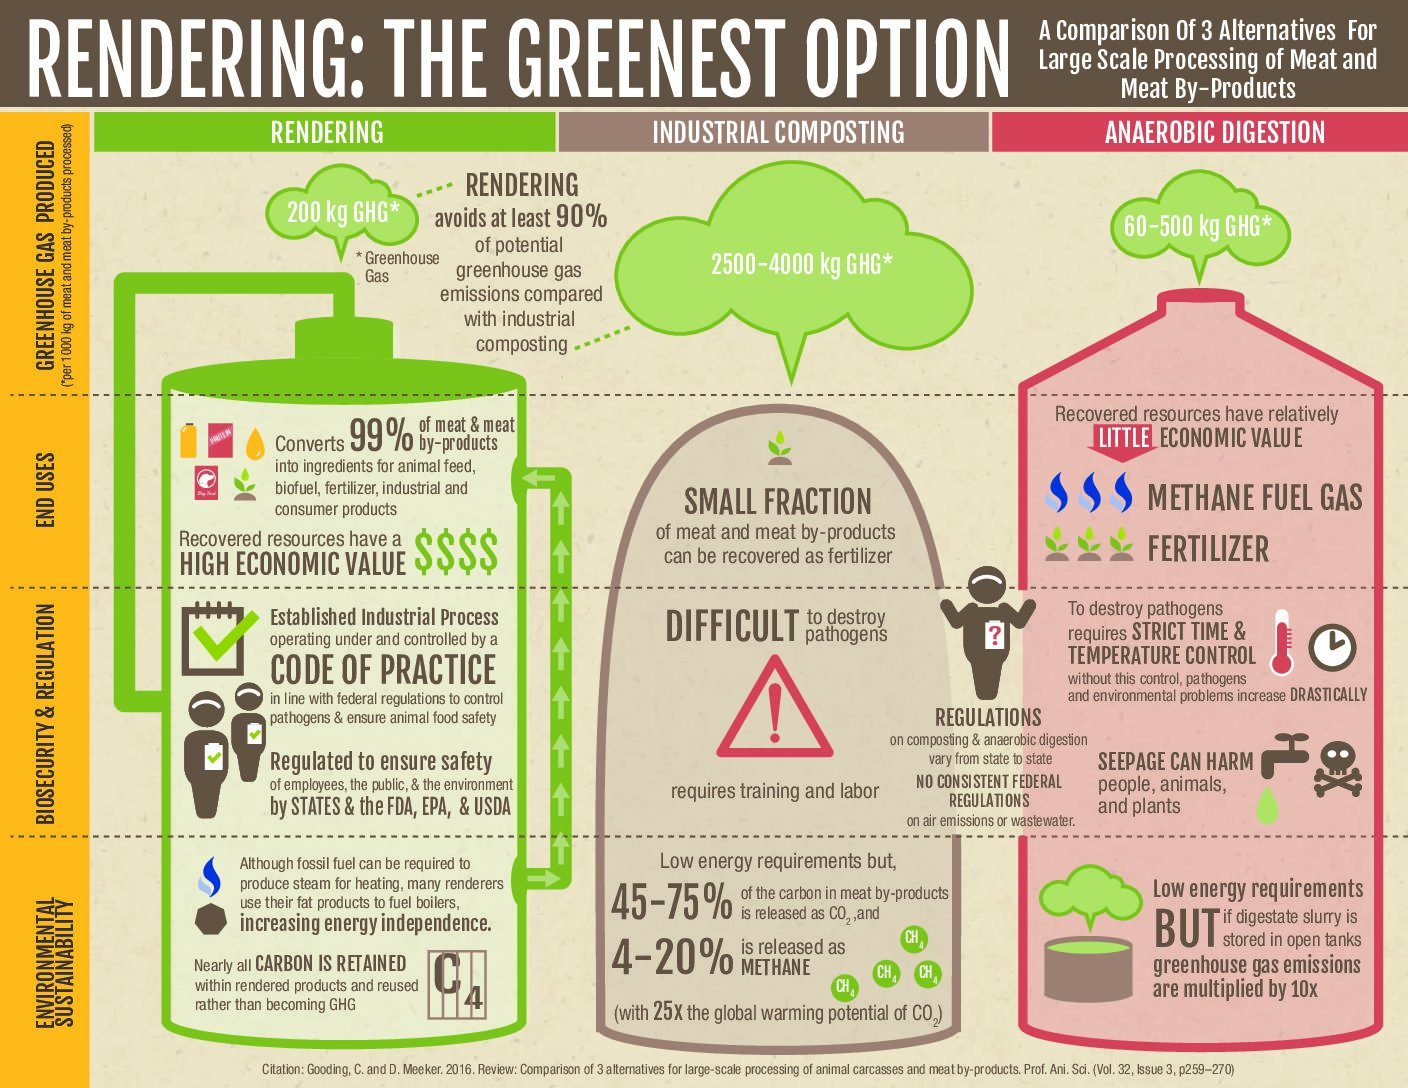 Rendering - The Greenest Option